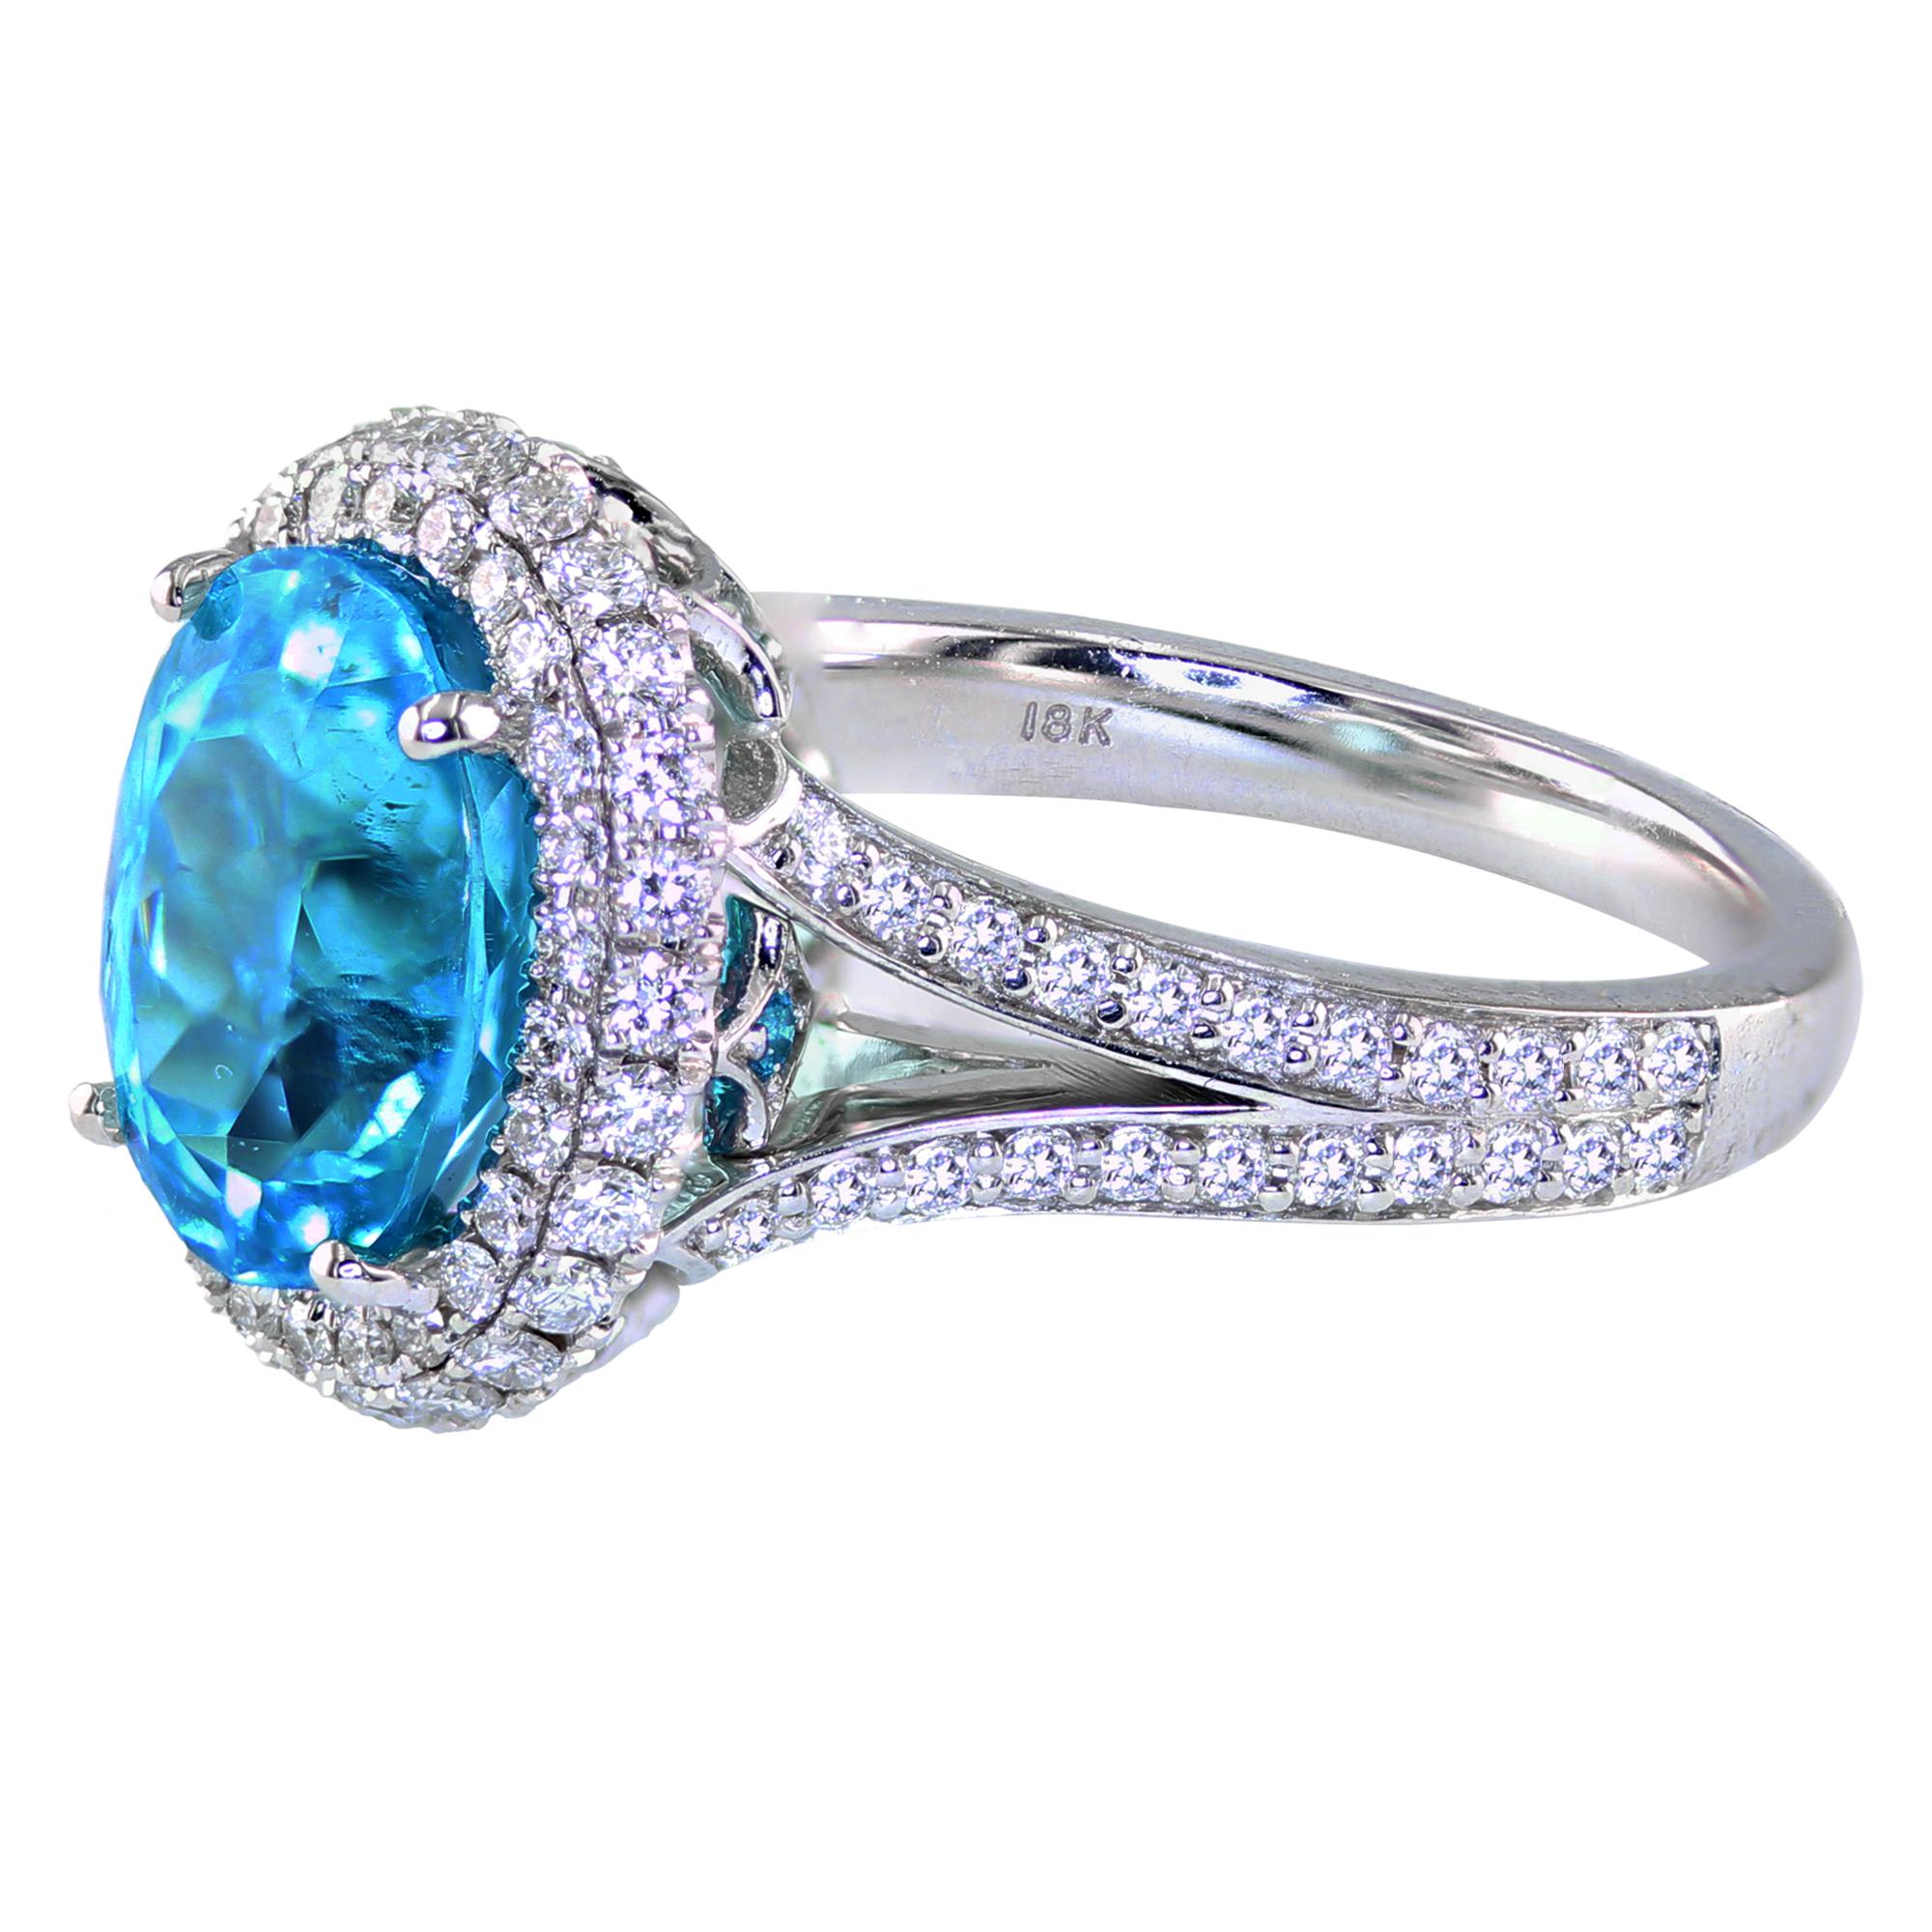 This PARAIBA TOURMALINE PRINCESS RING holds a GIA Certified 3.95 carat Oval Brazilian Paraiba Tourmaline. Embellished with Paraiba Melee set in a kite gallery, surrounded by 0.90 carat diamonds.

Set in a split shank in 18k. 

Feel like an elegant